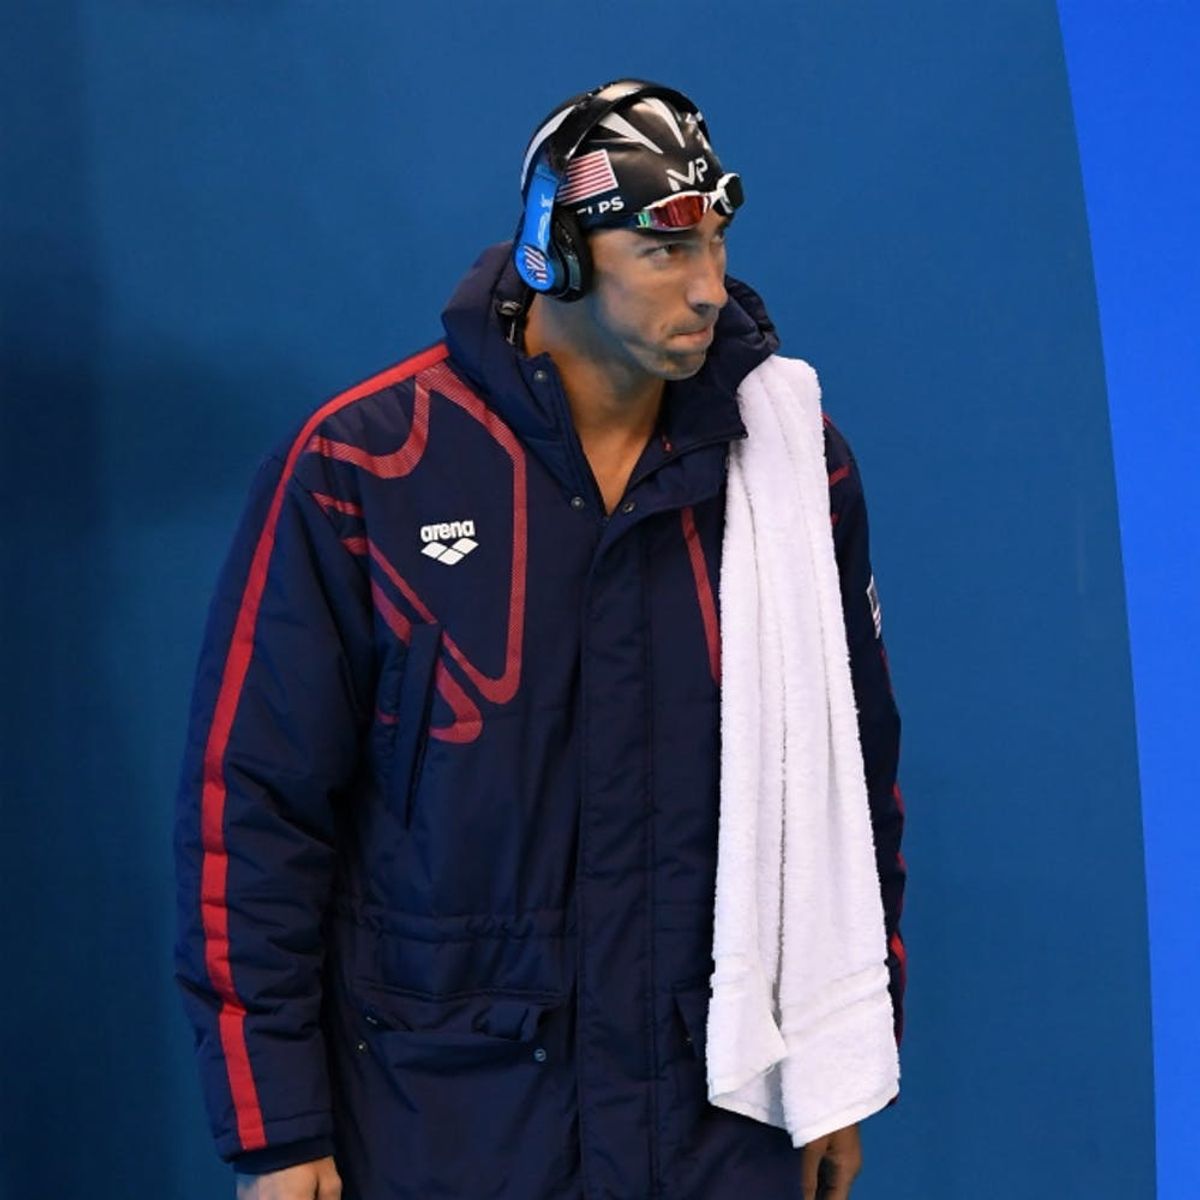 Twitter’s Reaction to Michael Phelps’ Game Face Is the Gift That Keeps on Giving